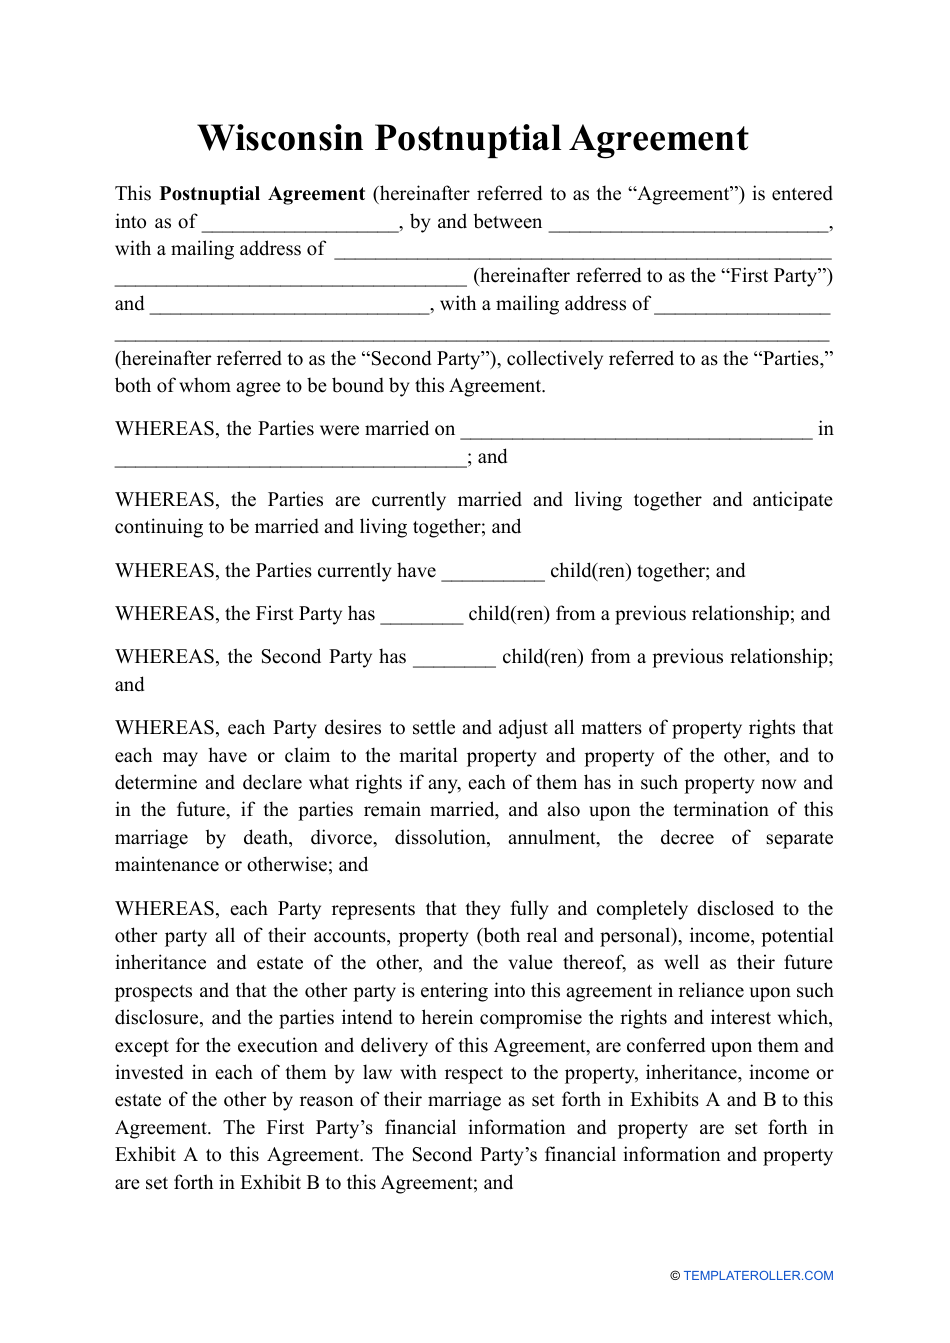 Postnuptial Agreement Template - Wisconsin, Page 1